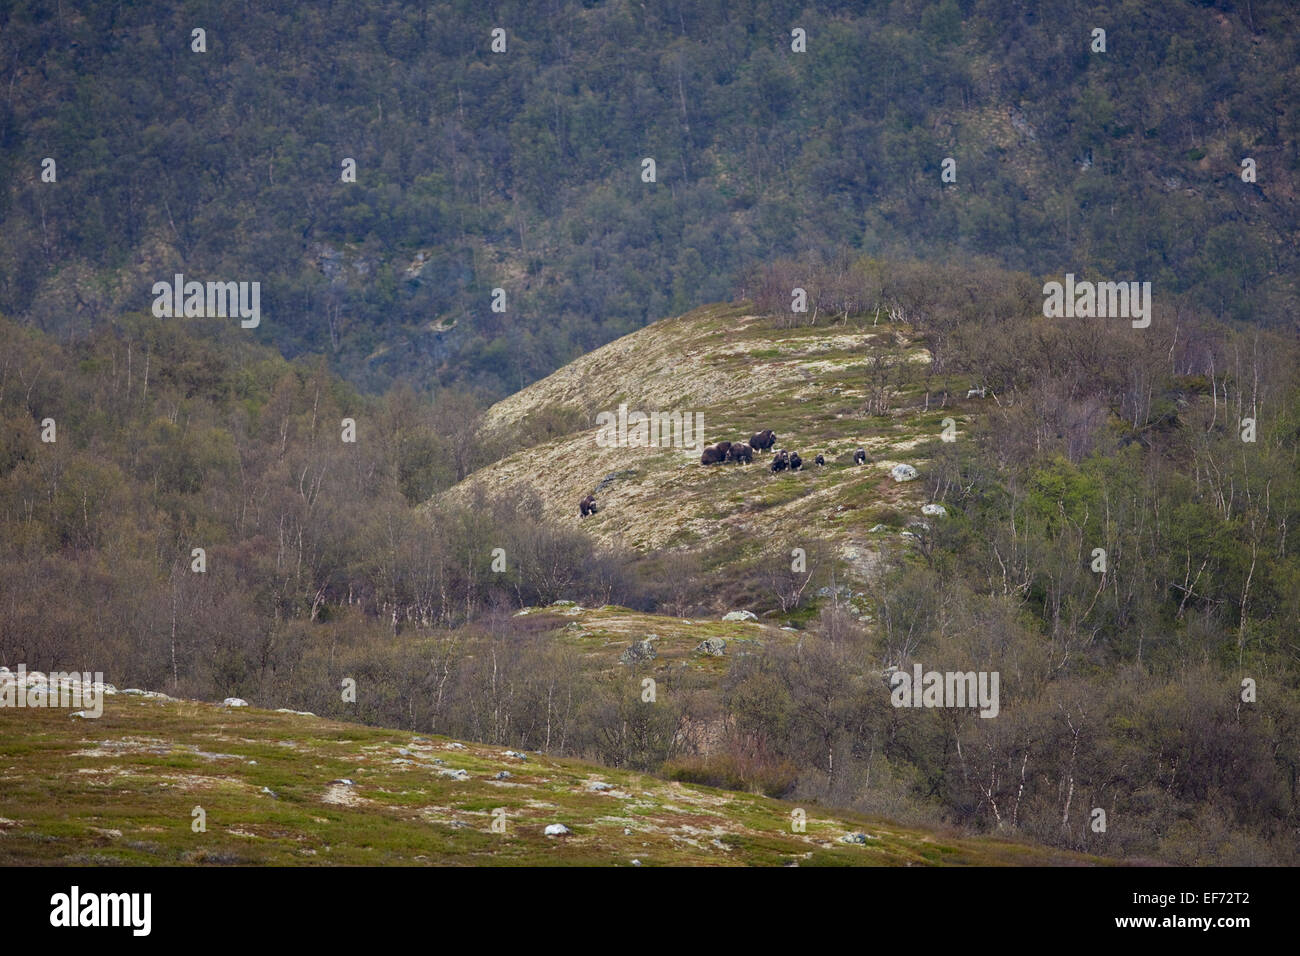 Herd of musk oxen on mountain side Stock Photo